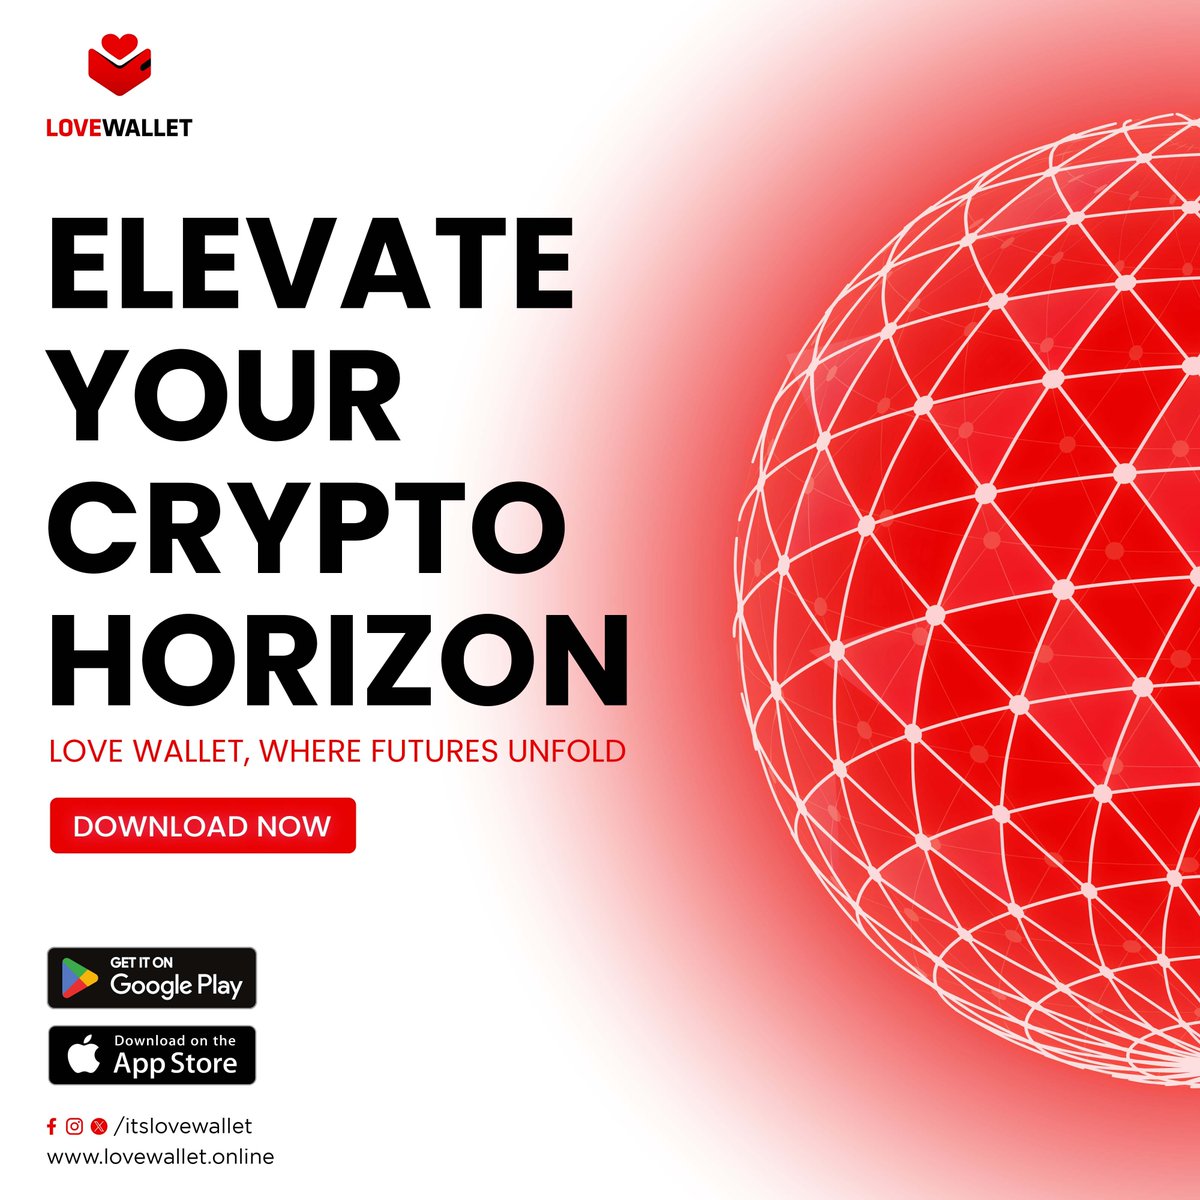 Elevate Your Crypto Horizon with #LoveWallet, Where Futures Unfold. 

Unleash the potential of your crypto journey and embrace tomorrow.

#fintech #fintechs #fintechnews #fintechstartup #fintechday #instafintech #fintechbussiness #fintechrevolution #fintechweek #fintechtime